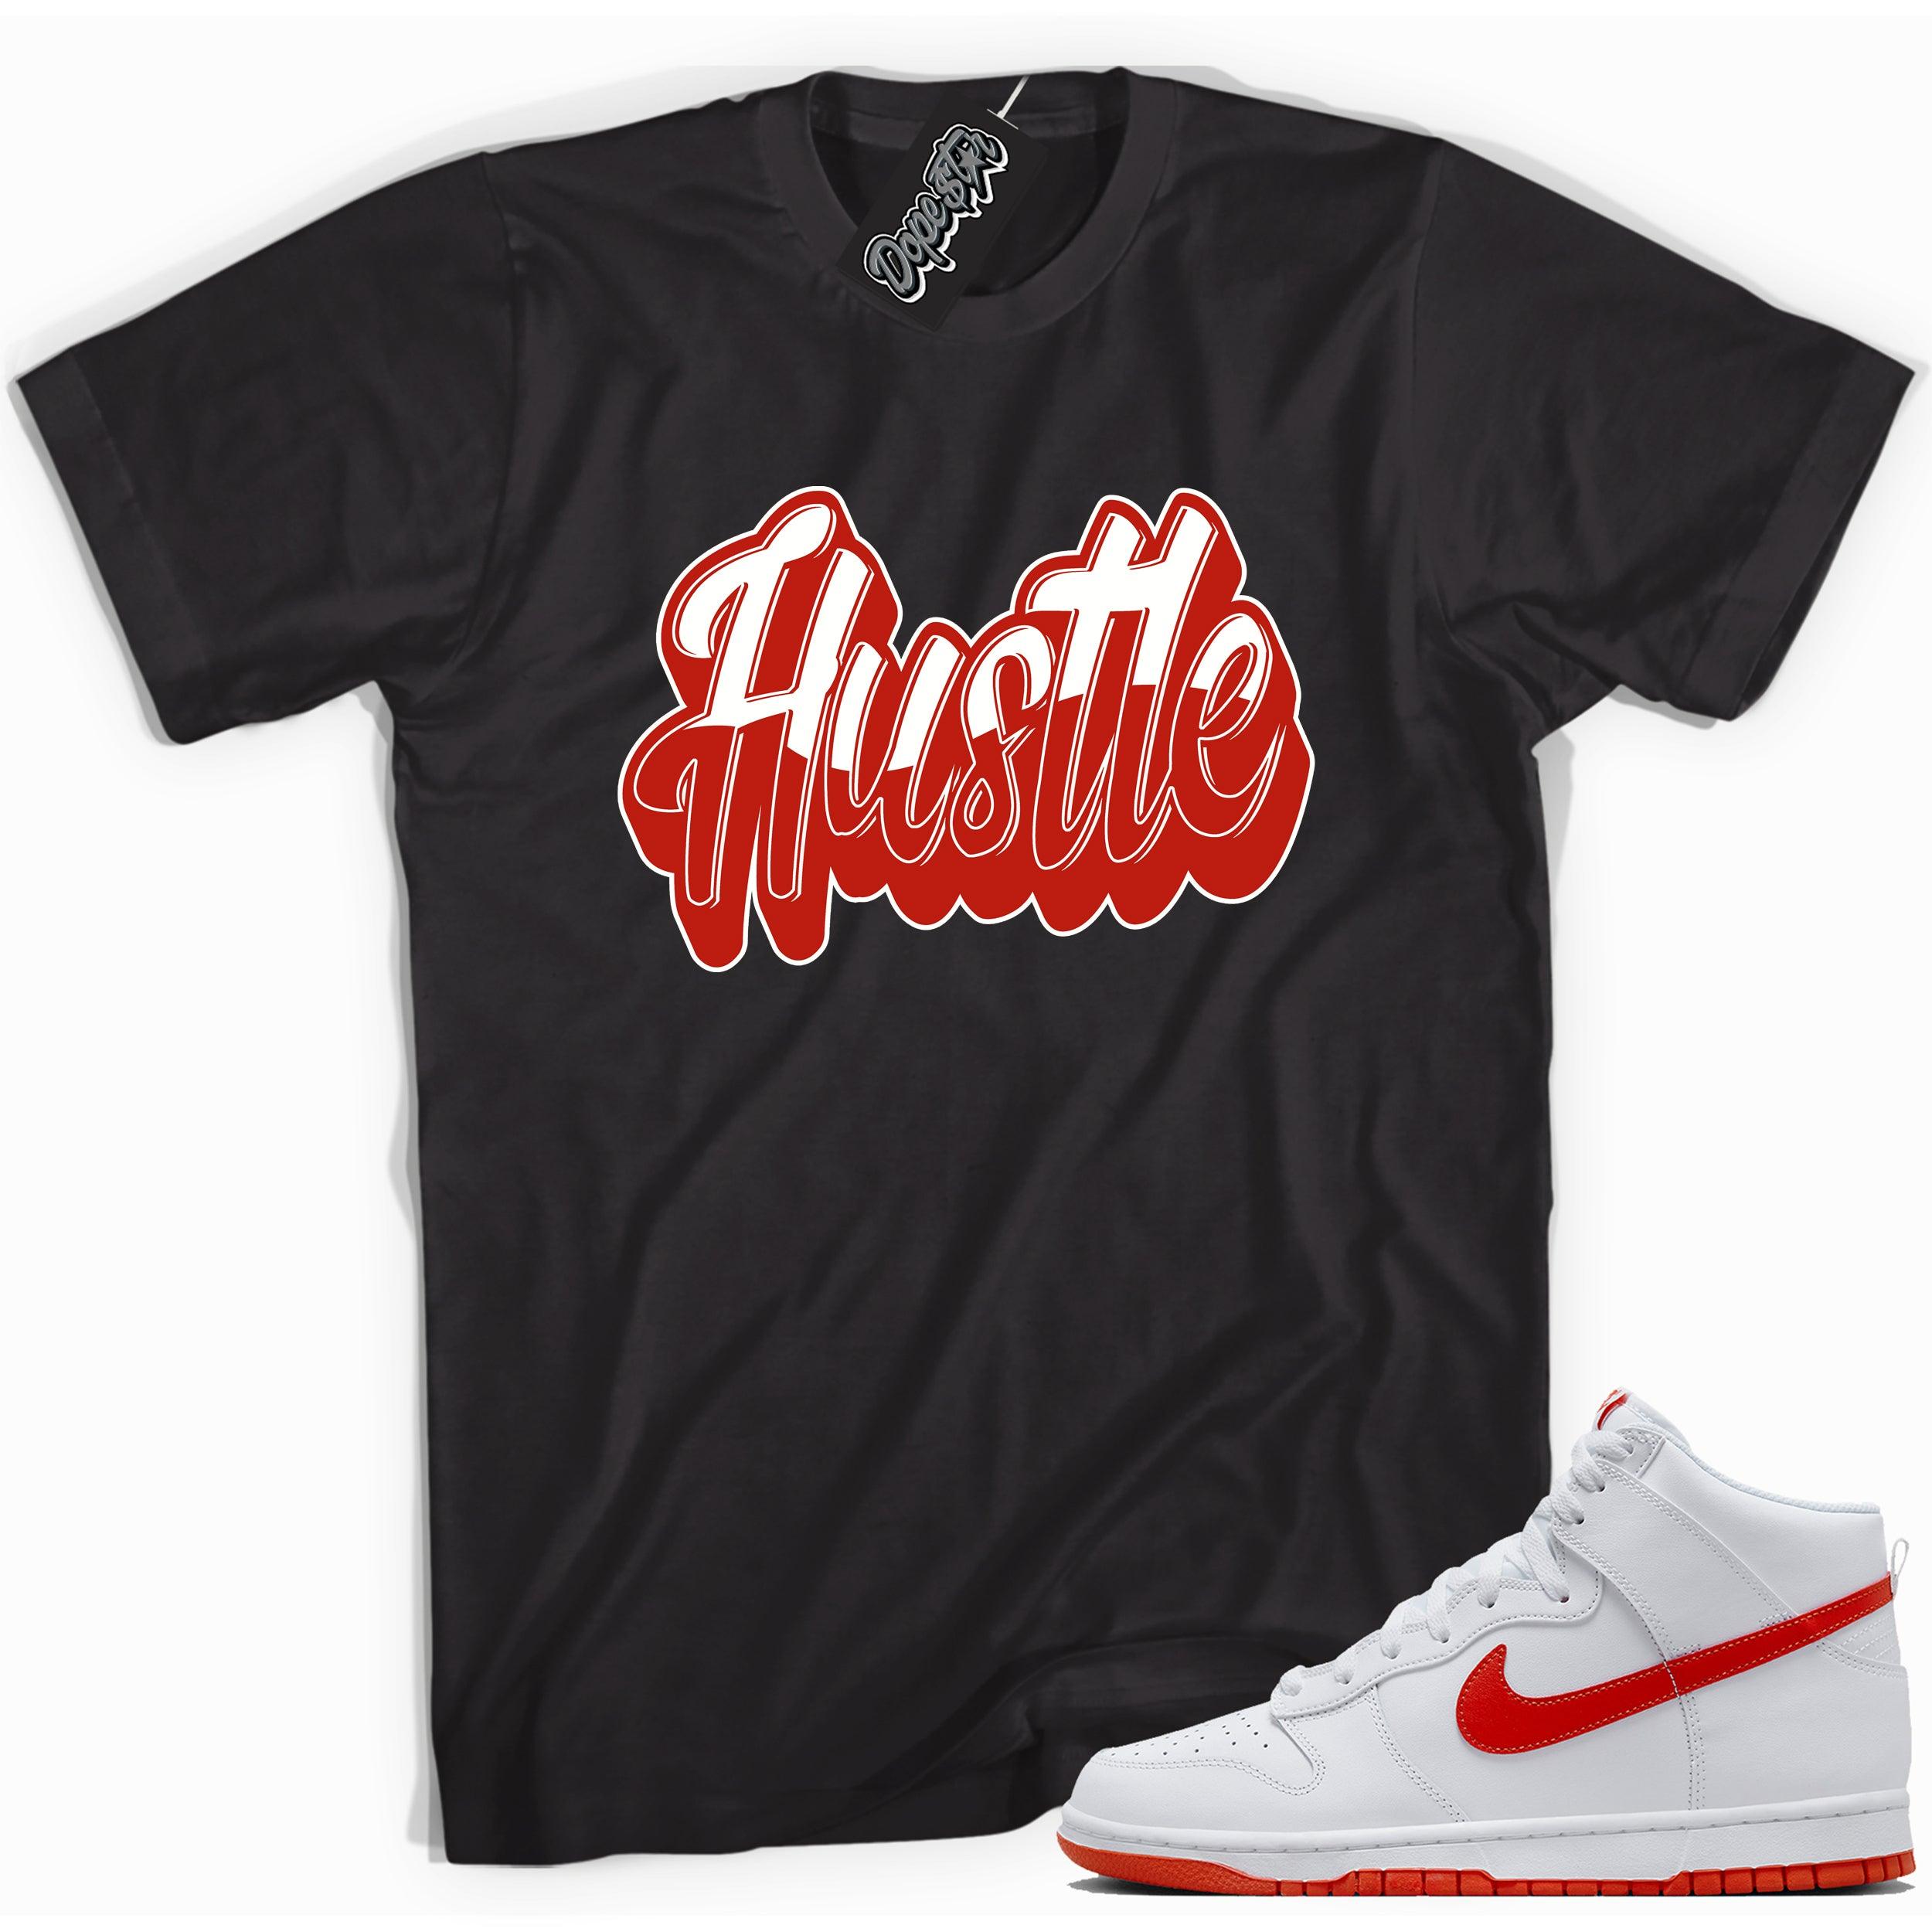 Cool black graphic tee with 'hustle' print, that perfectly matches Nike Dunk High White Picante Red sneakers.